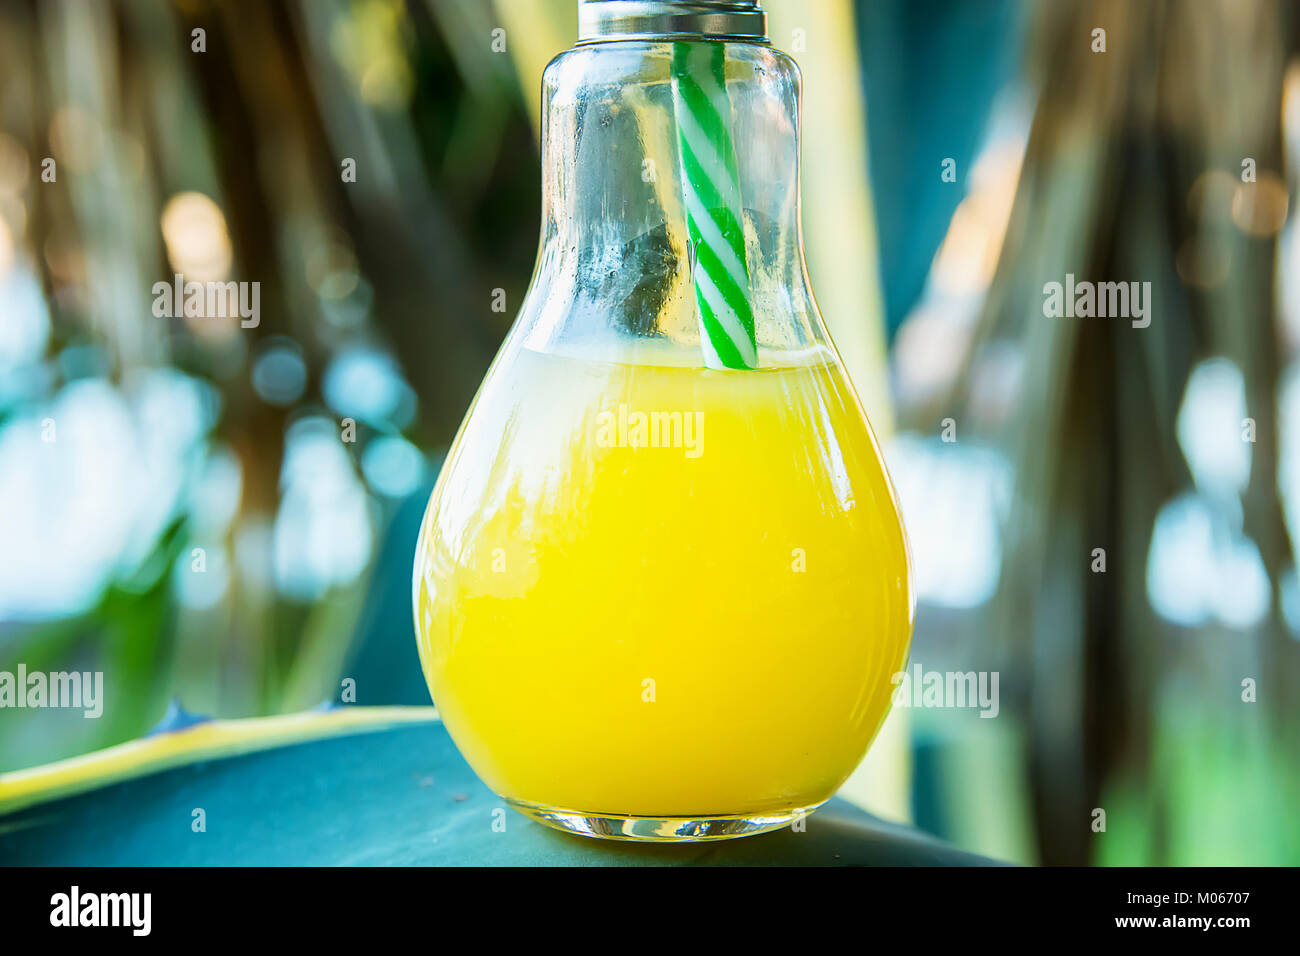 Light Bulb Glass Bottle with Freshly Pressed Orange Tropical Fruits Juice Standing on Agave Leaf. Sunlight in Background. Seaside Beach Vacation Relax Stock Photo